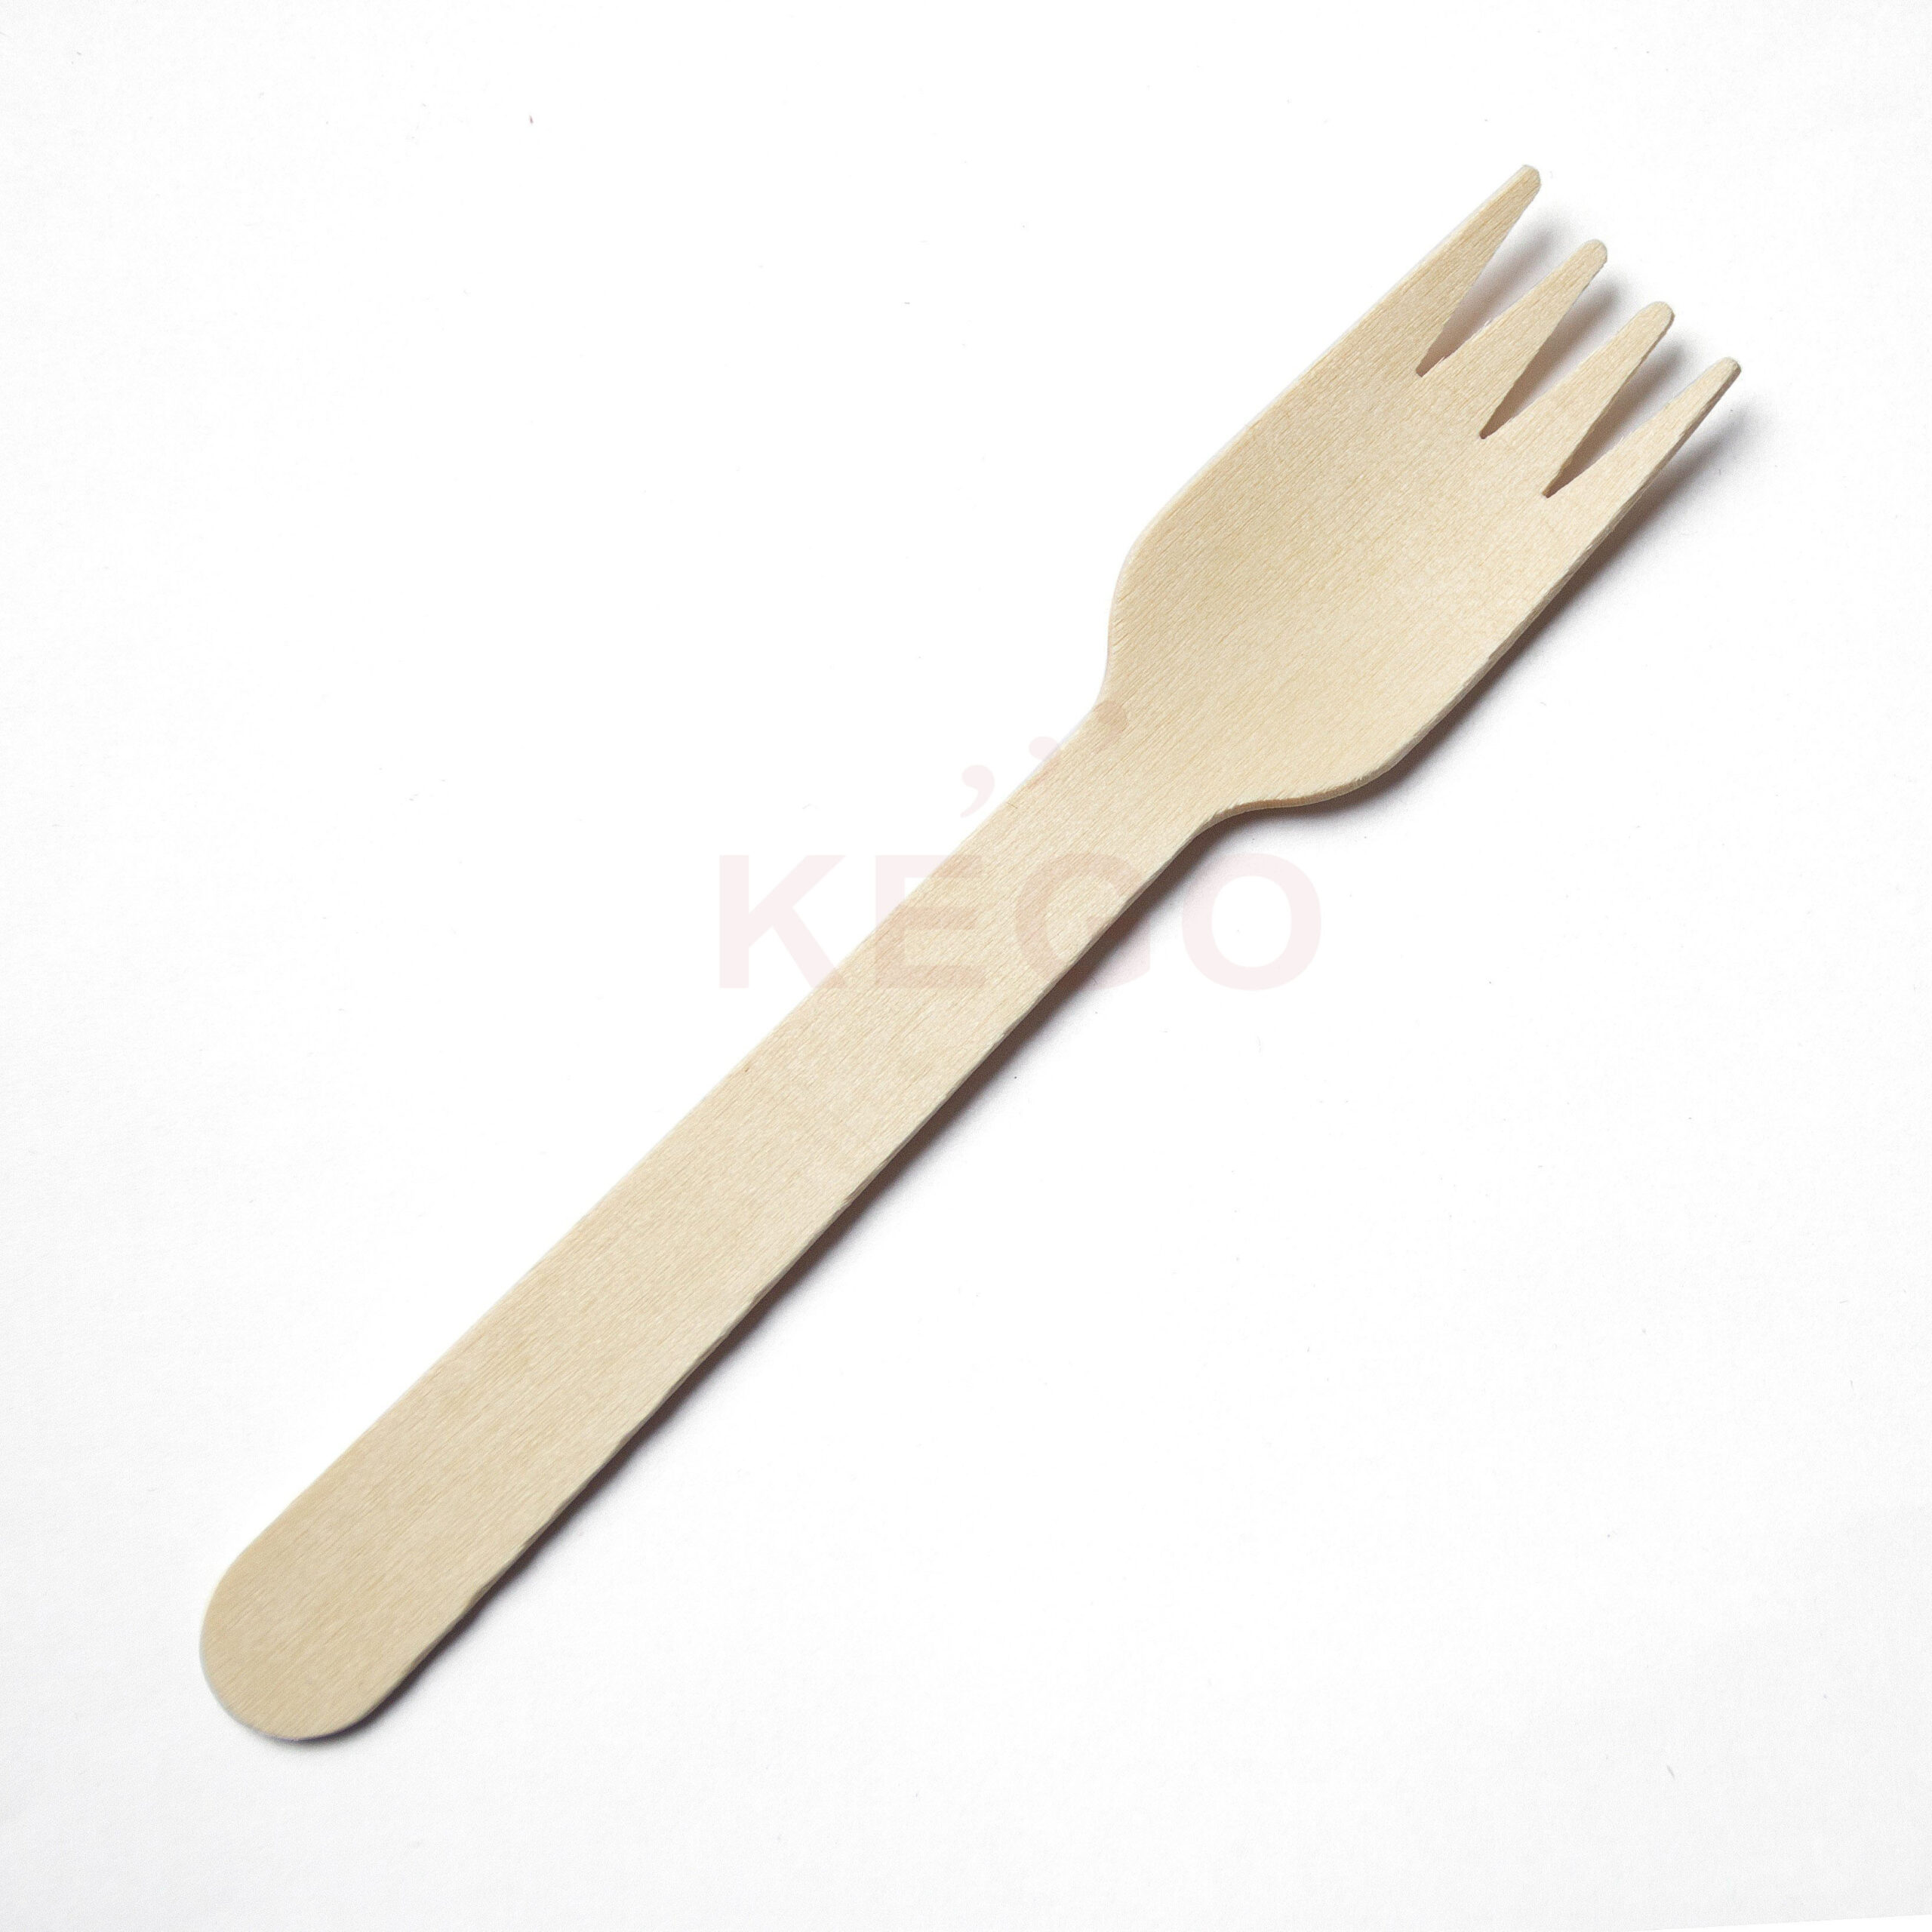 https://disposablewoodencutlery.com/wp-content/uploads/2015/09/Disposable-Wooden-Fork-160-2-1-scaled.jpg